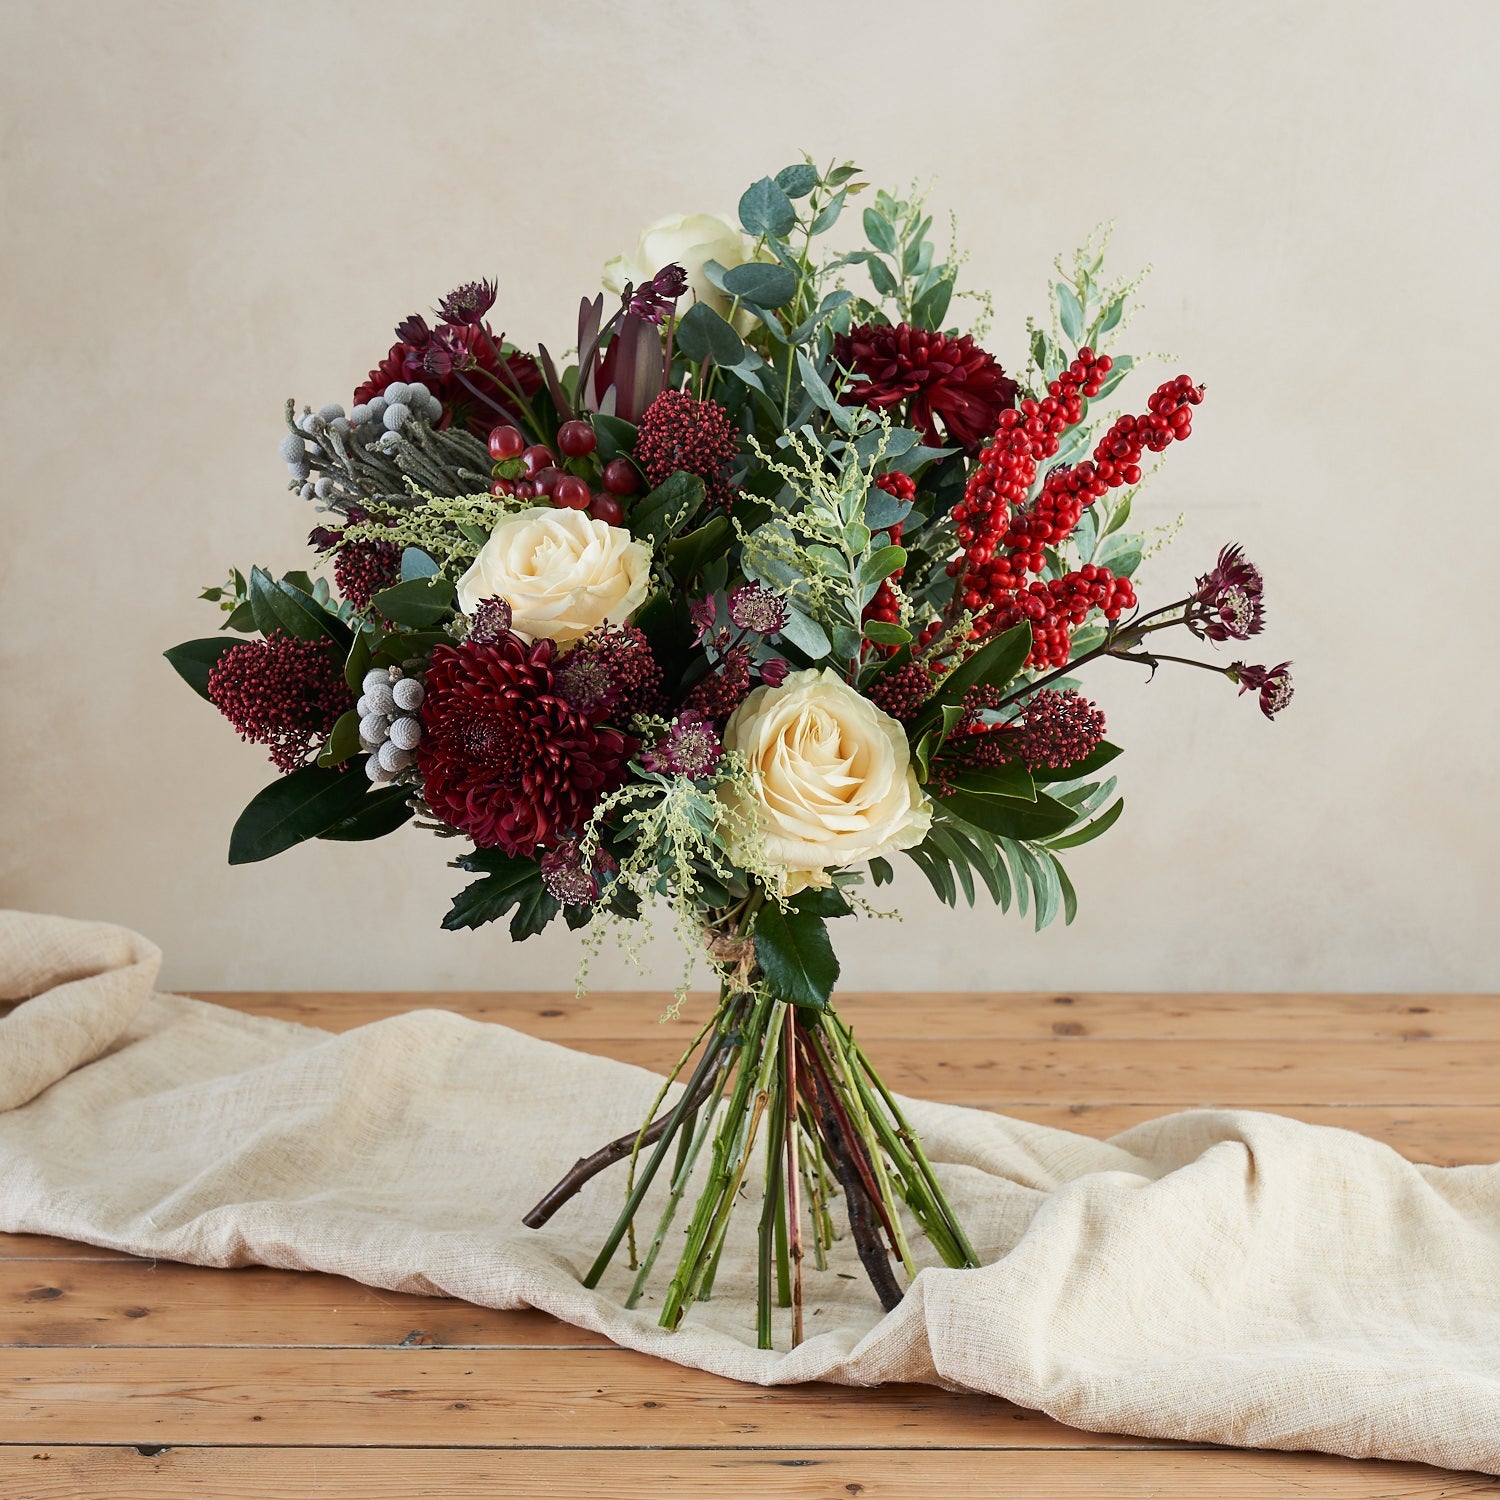 Noel Christmas bouquet with burgundy flowers, white roses and berries